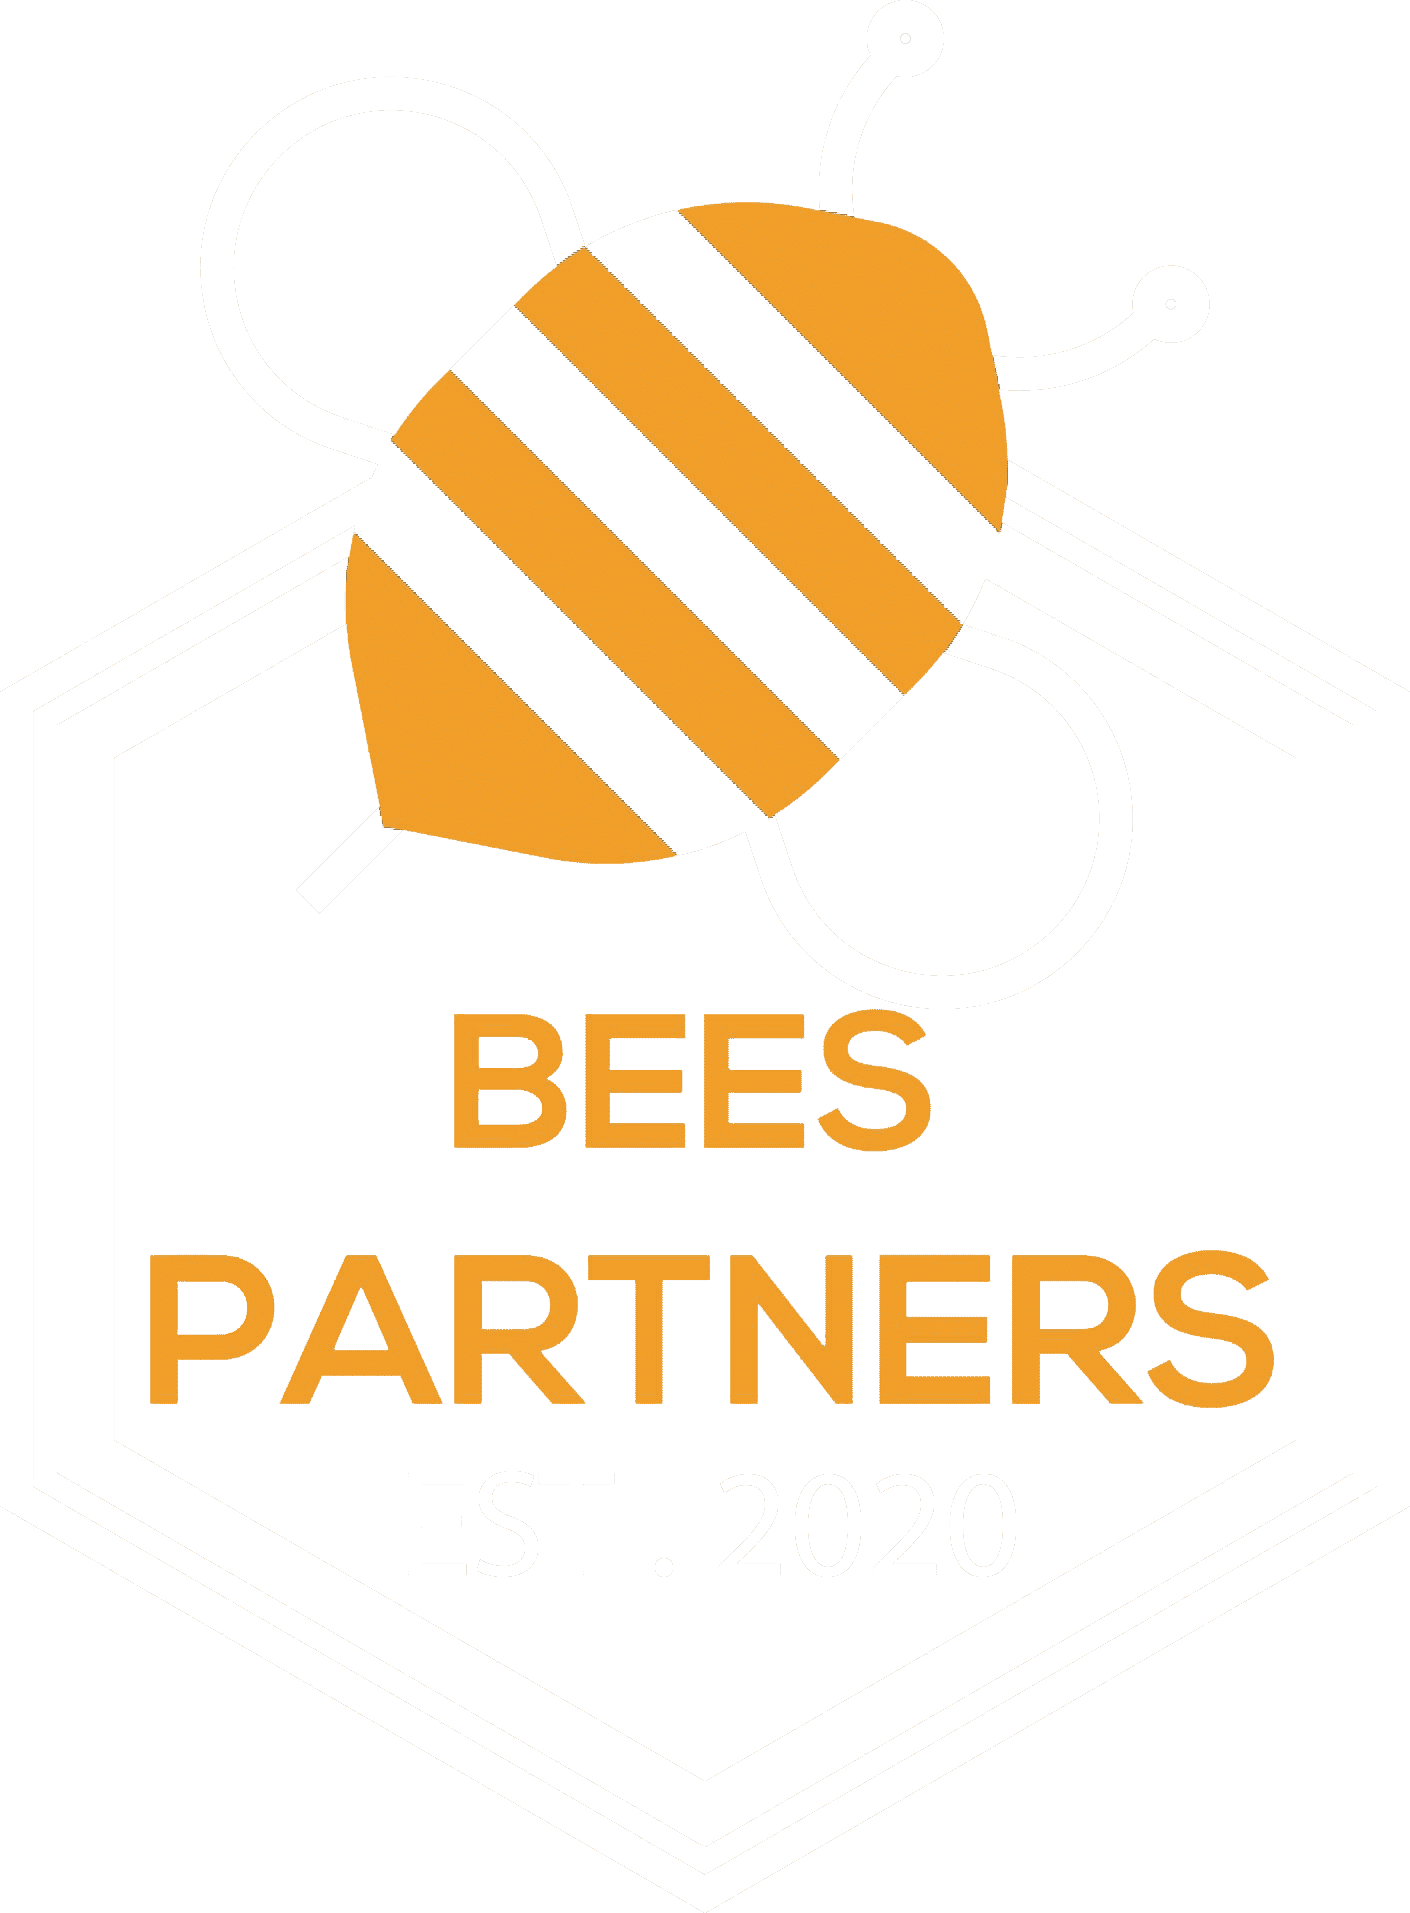 Bees Partners - Pure honey